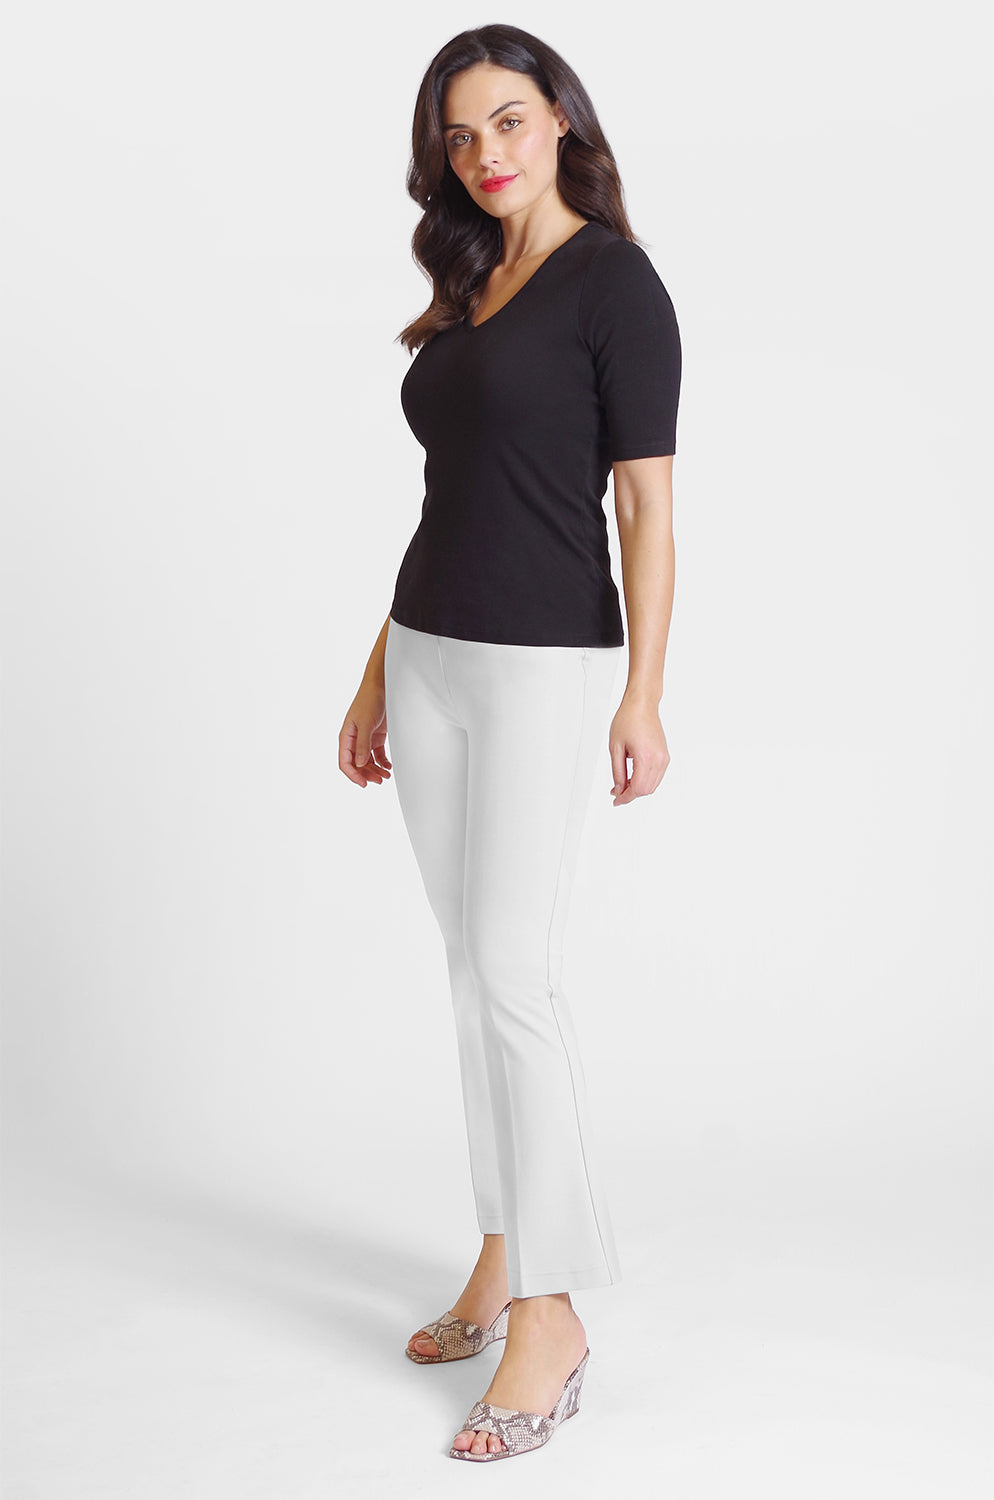 Cher Flare Pant - Paramount Knit